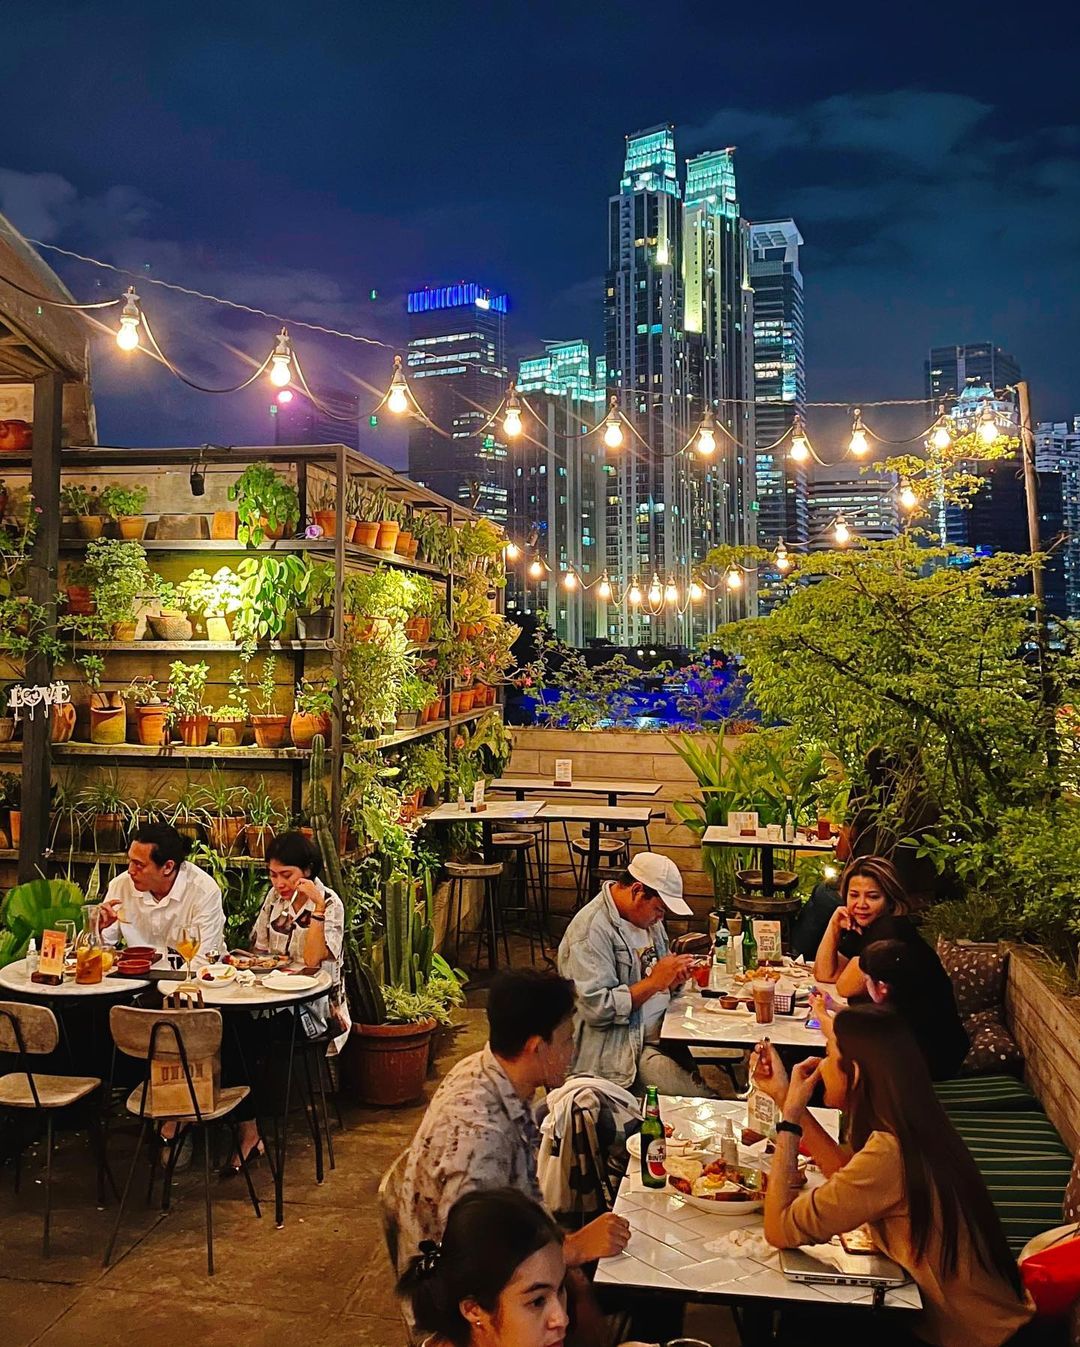 Cafe Rooftop Jakarta Hause Rooftop Kitchen And Bar Image From @hauserooftop